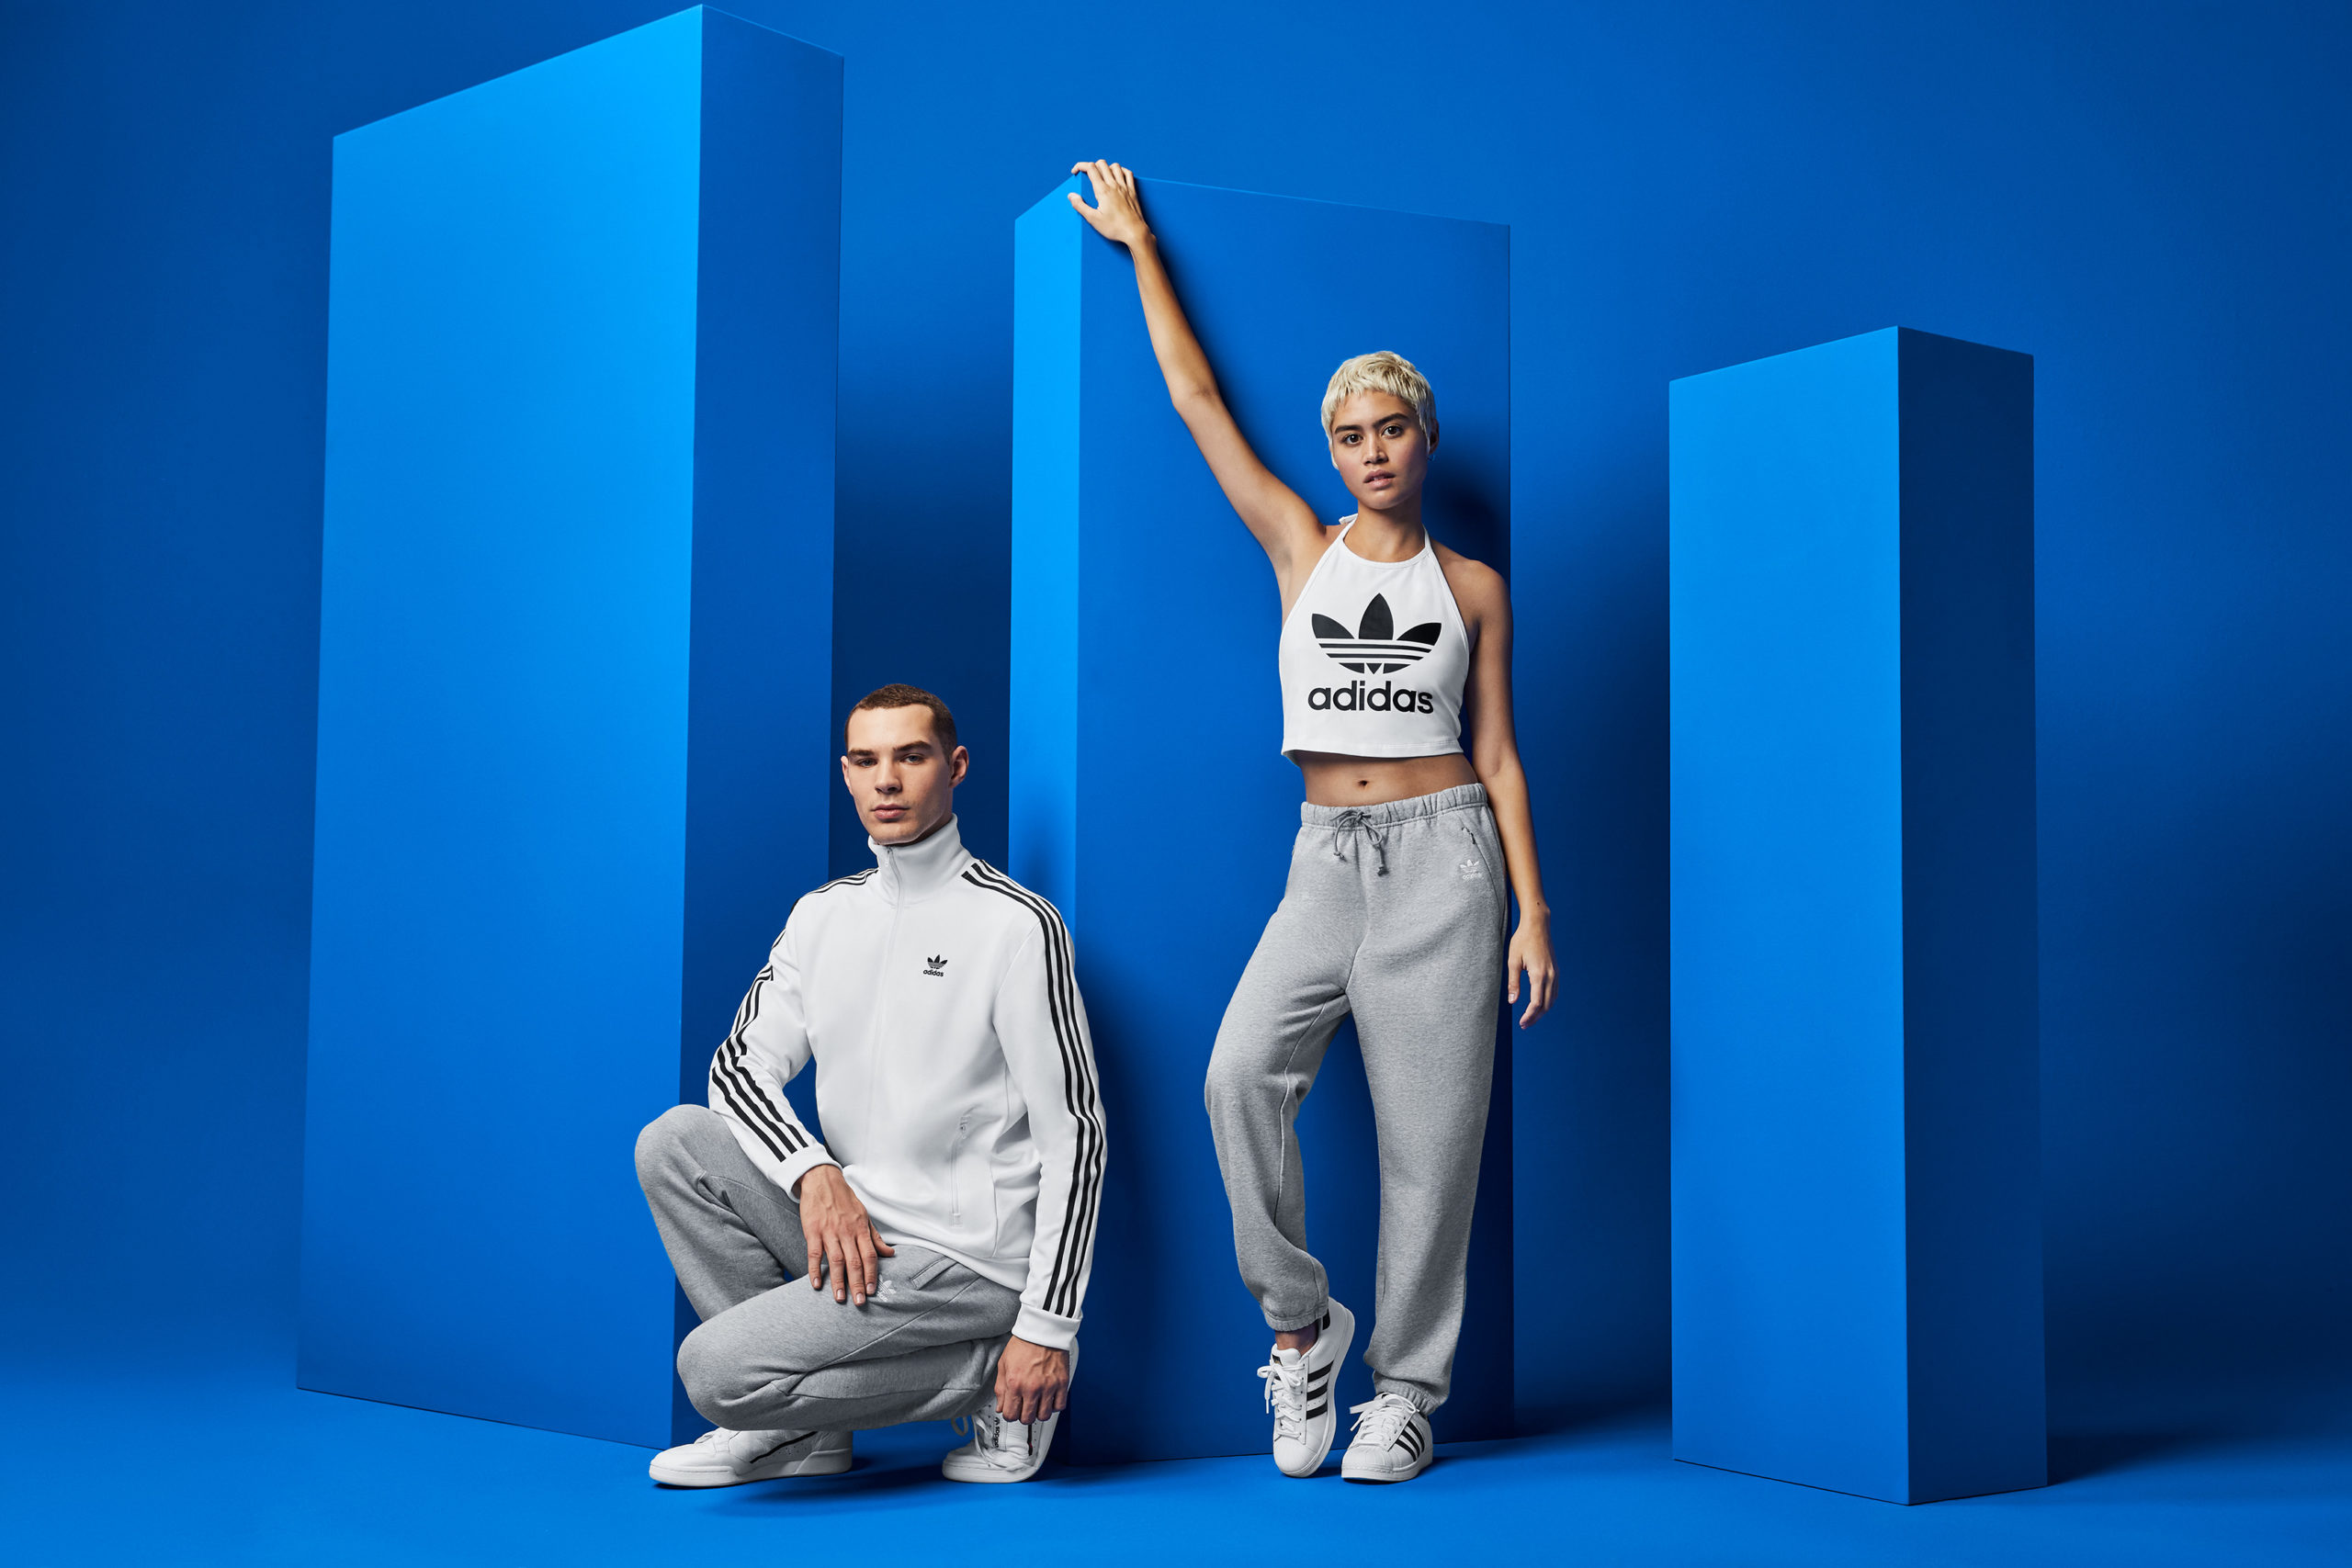 Two models, in white and gray, kneel and stand in a blue set in front of three blue modular towers.